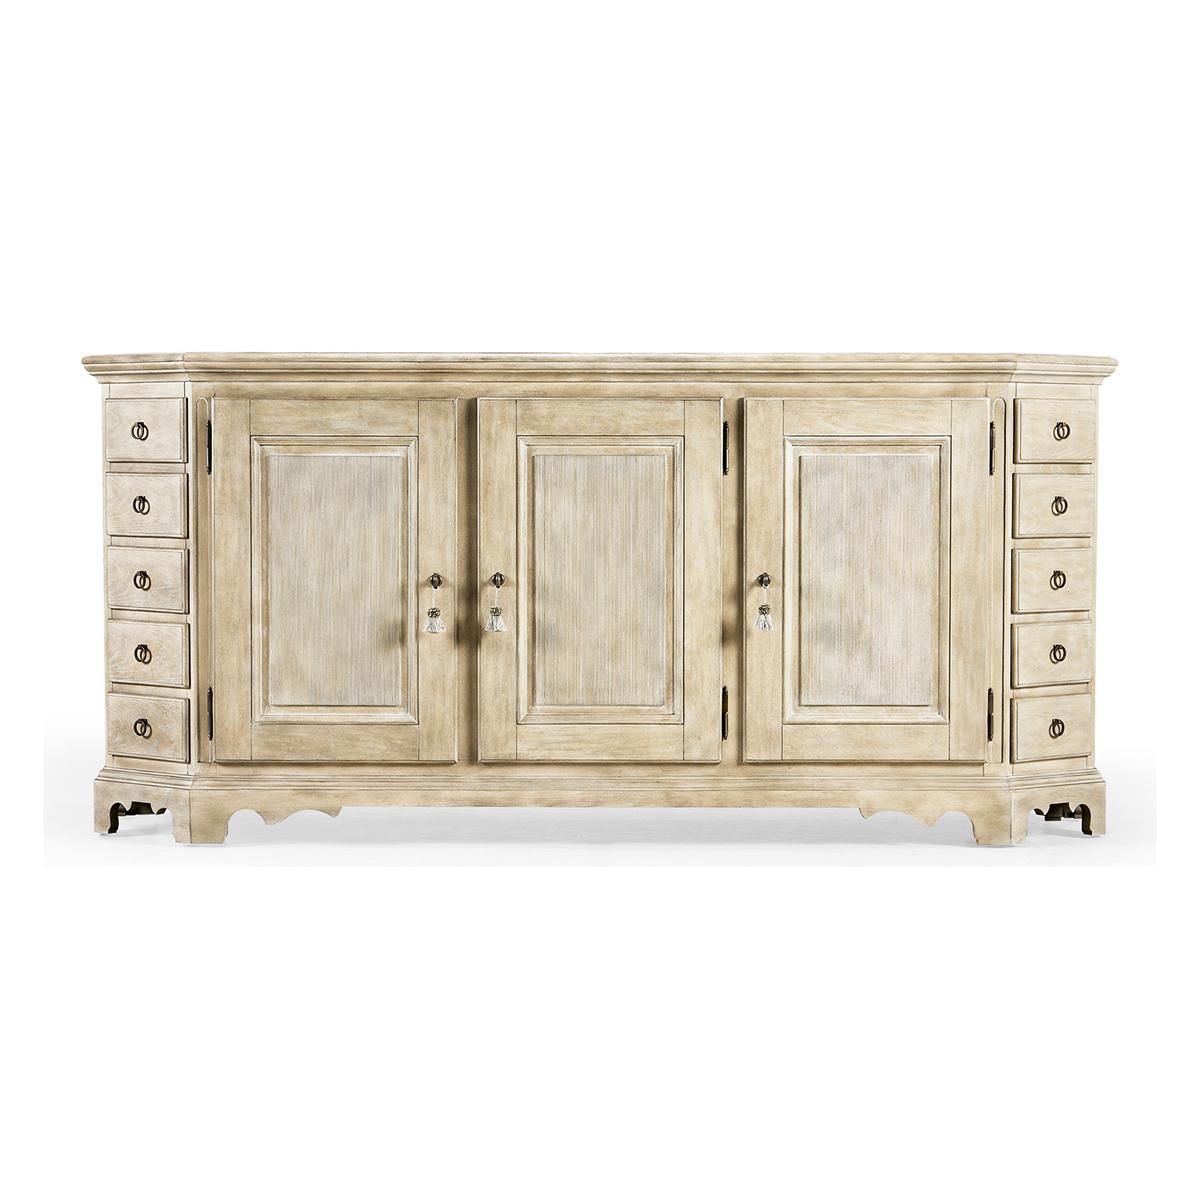 Provincial Buffet sideboard, handsome and refined, the sideboard has a unique canted corner design with thirteen hand-crafted drawers. Behind classically sculpted doors finished in nordic wheat, three interior drawers feature removable felt-lined